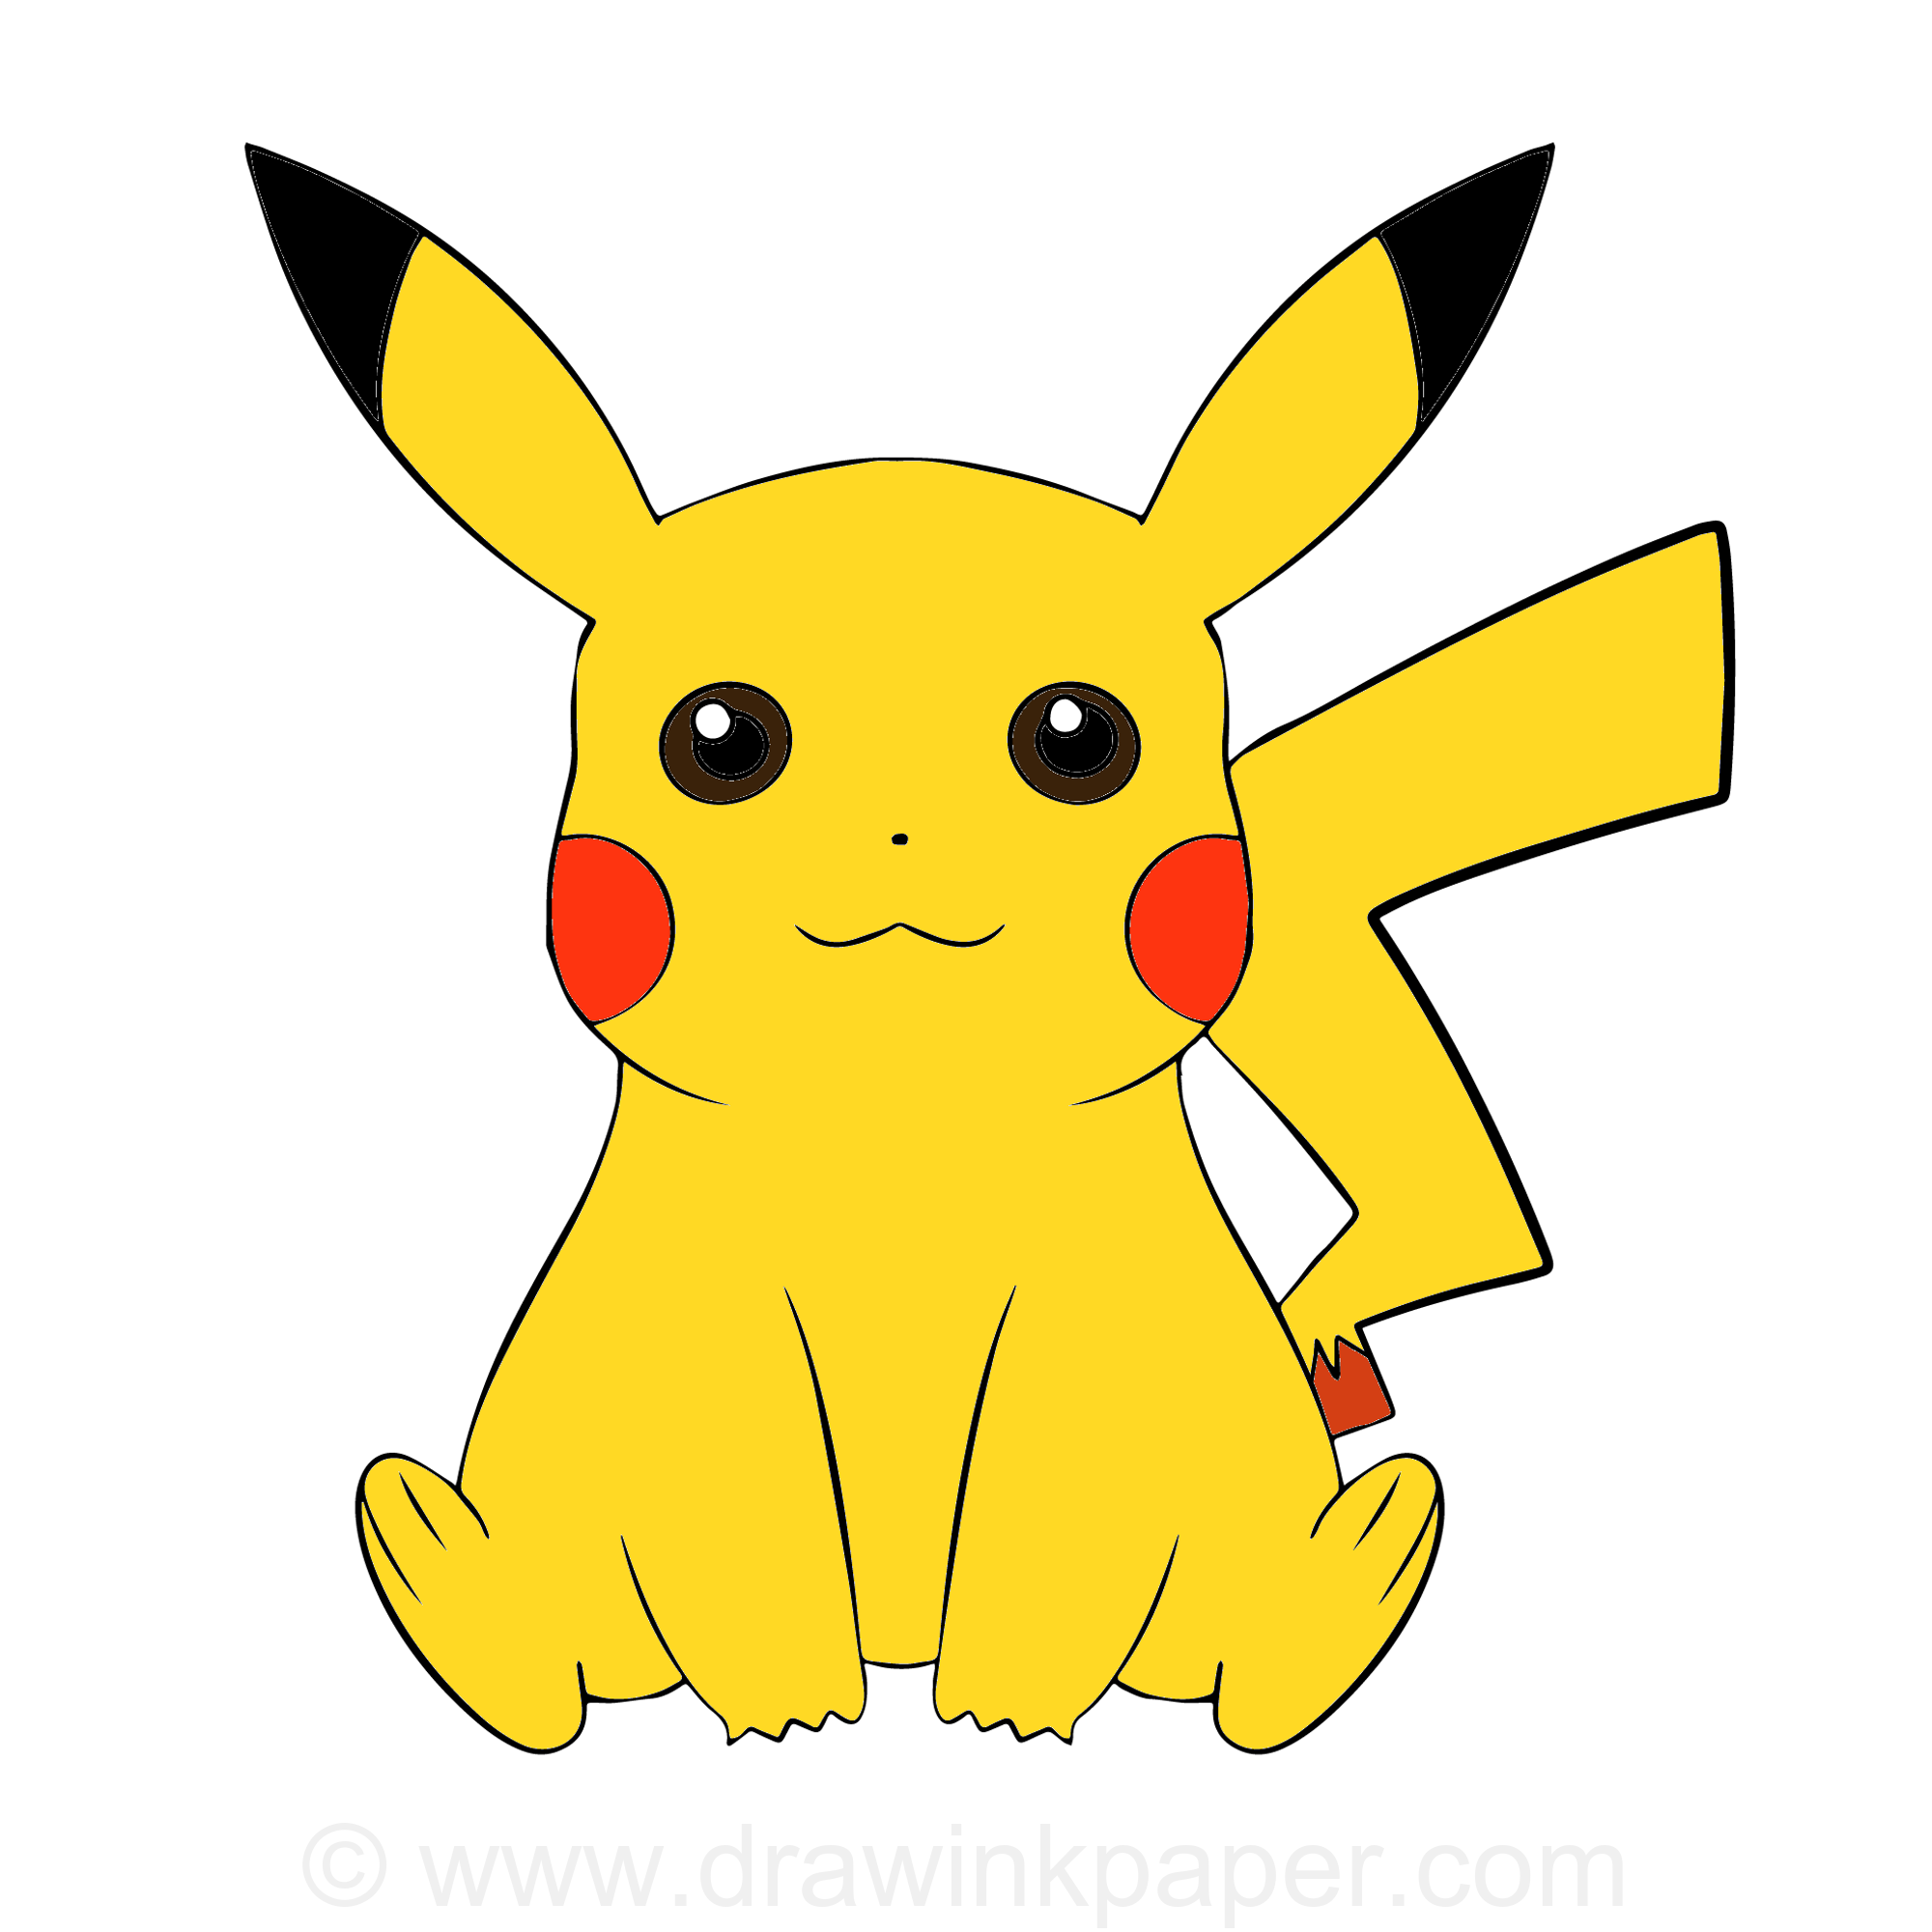 How to draw pikachu cute and easy step by step | Pokemon drawing